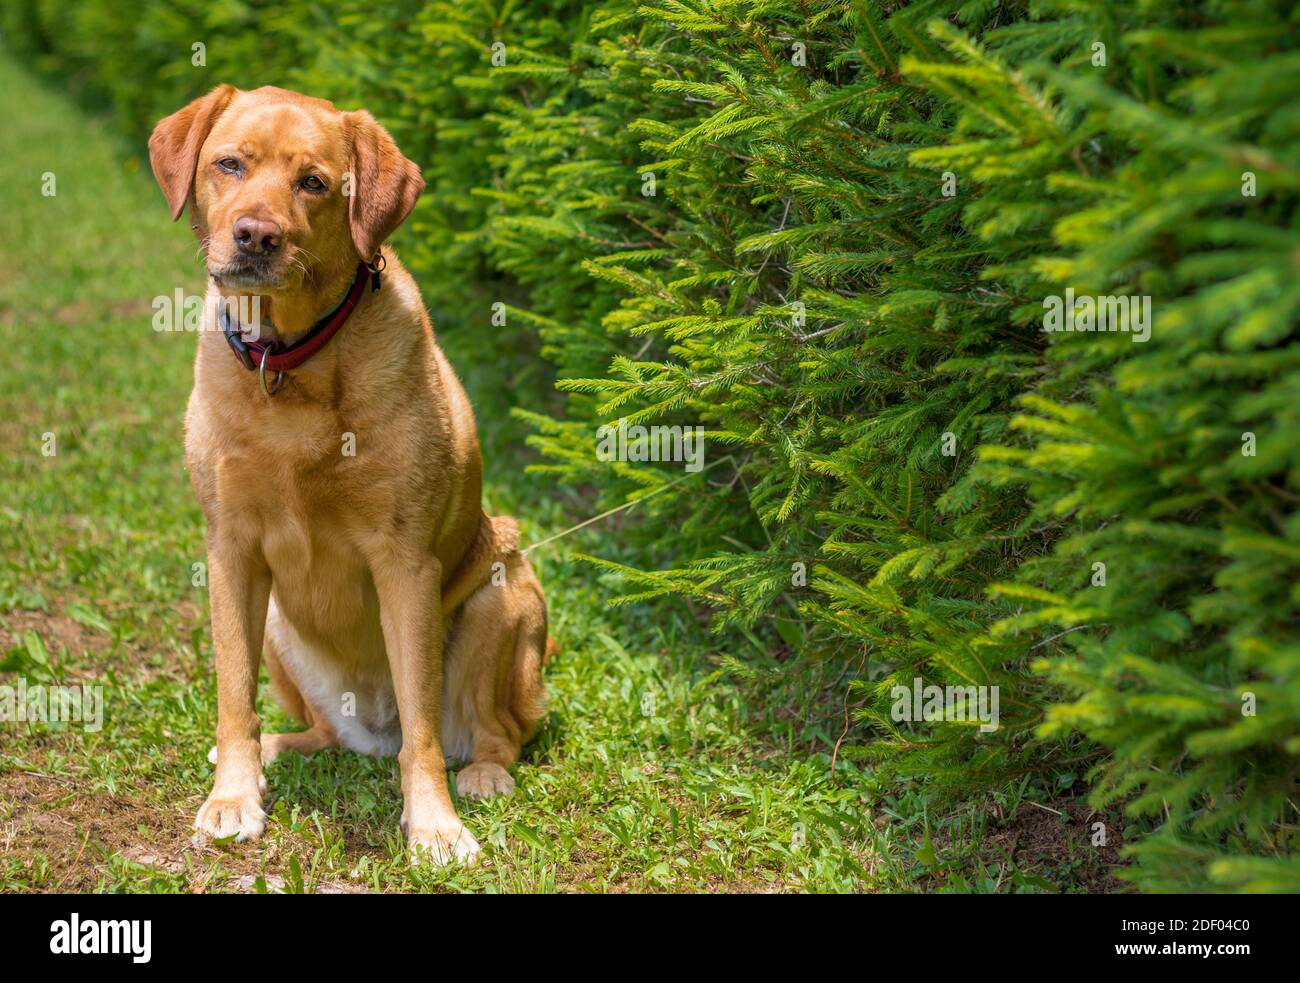 Dog yellow labrador retriever sitting and posing with slightly tilted head  in front of green pine trees. Stock Photo